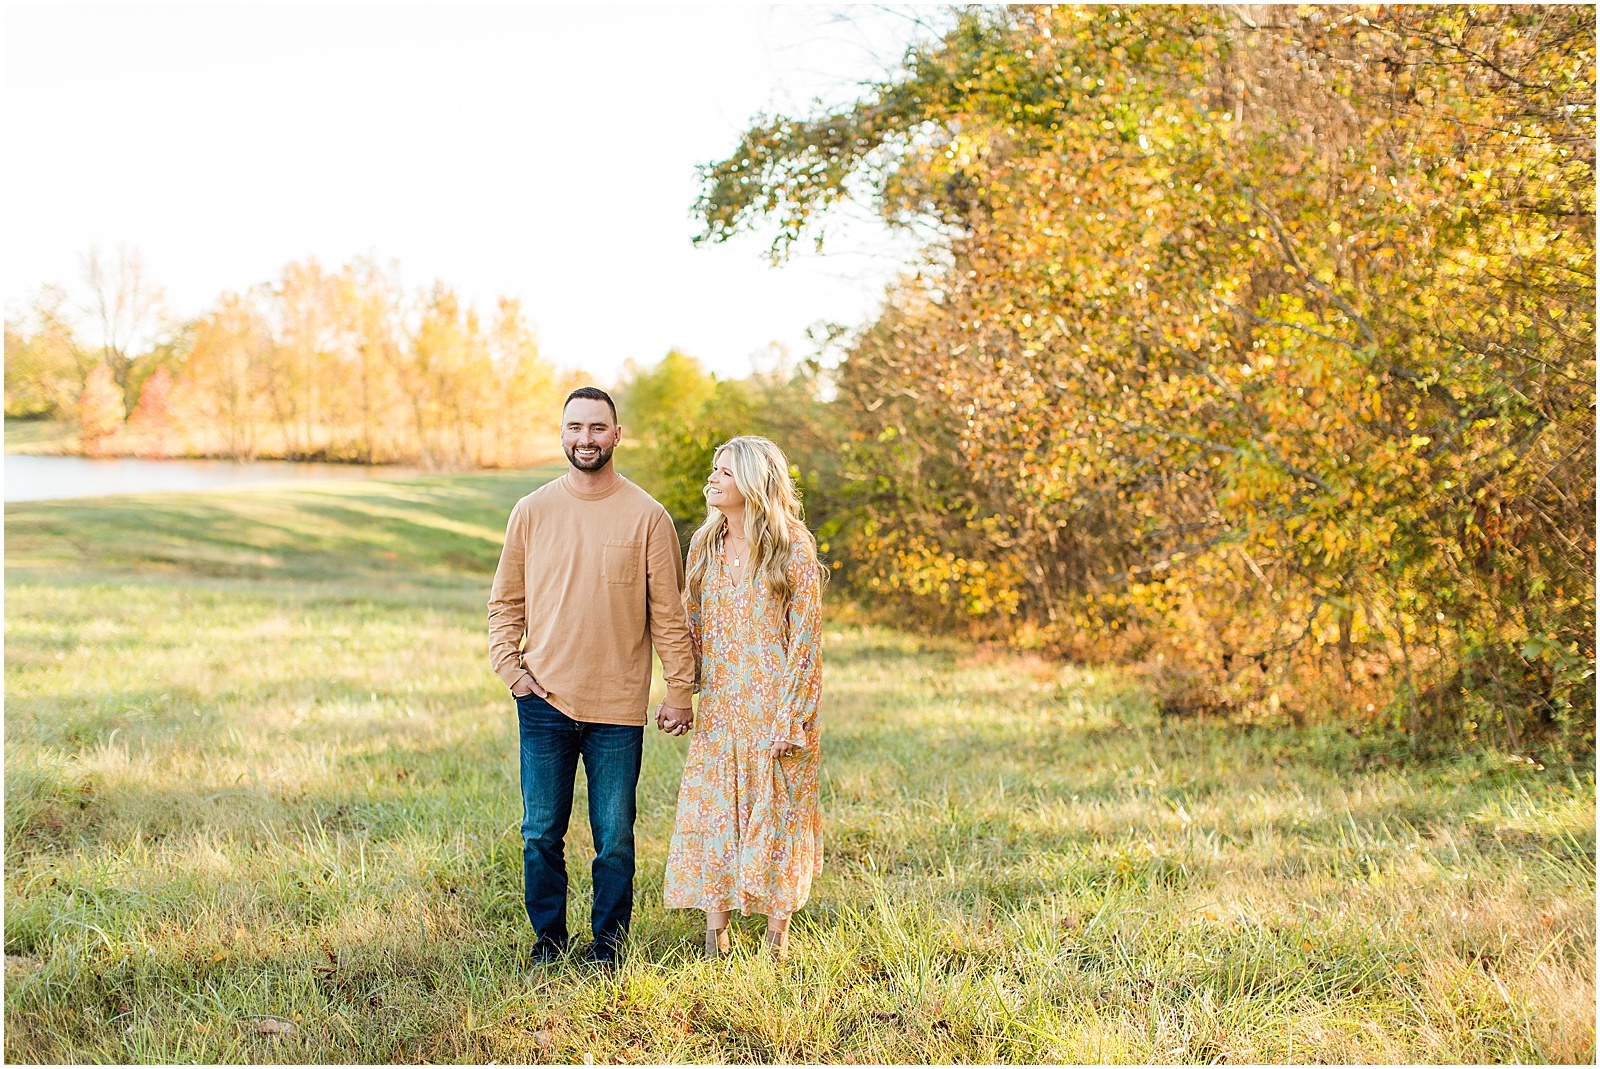 A Southern Indiana Engagement Session | Charleston and Erin | Bret and Brandie Photography009.jpg